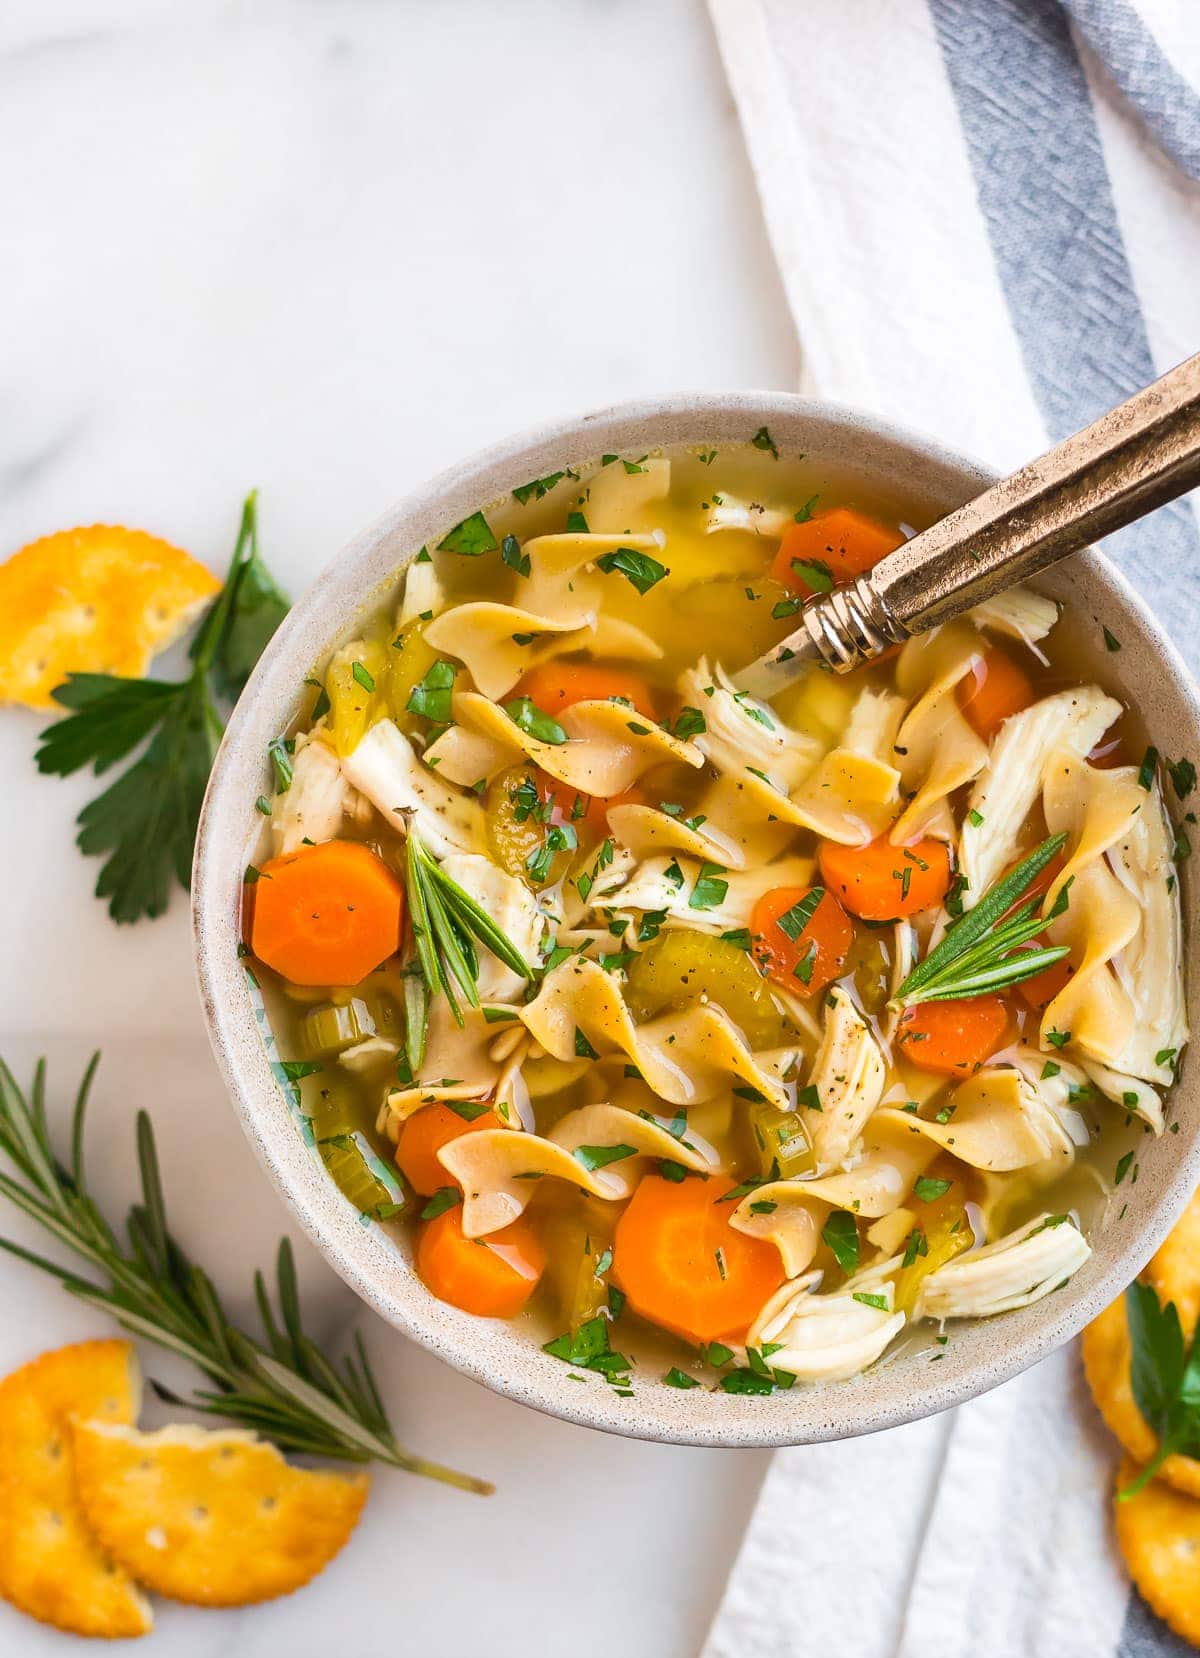 Crockpot chicken noodle soup in a bowl with carrots and herbs